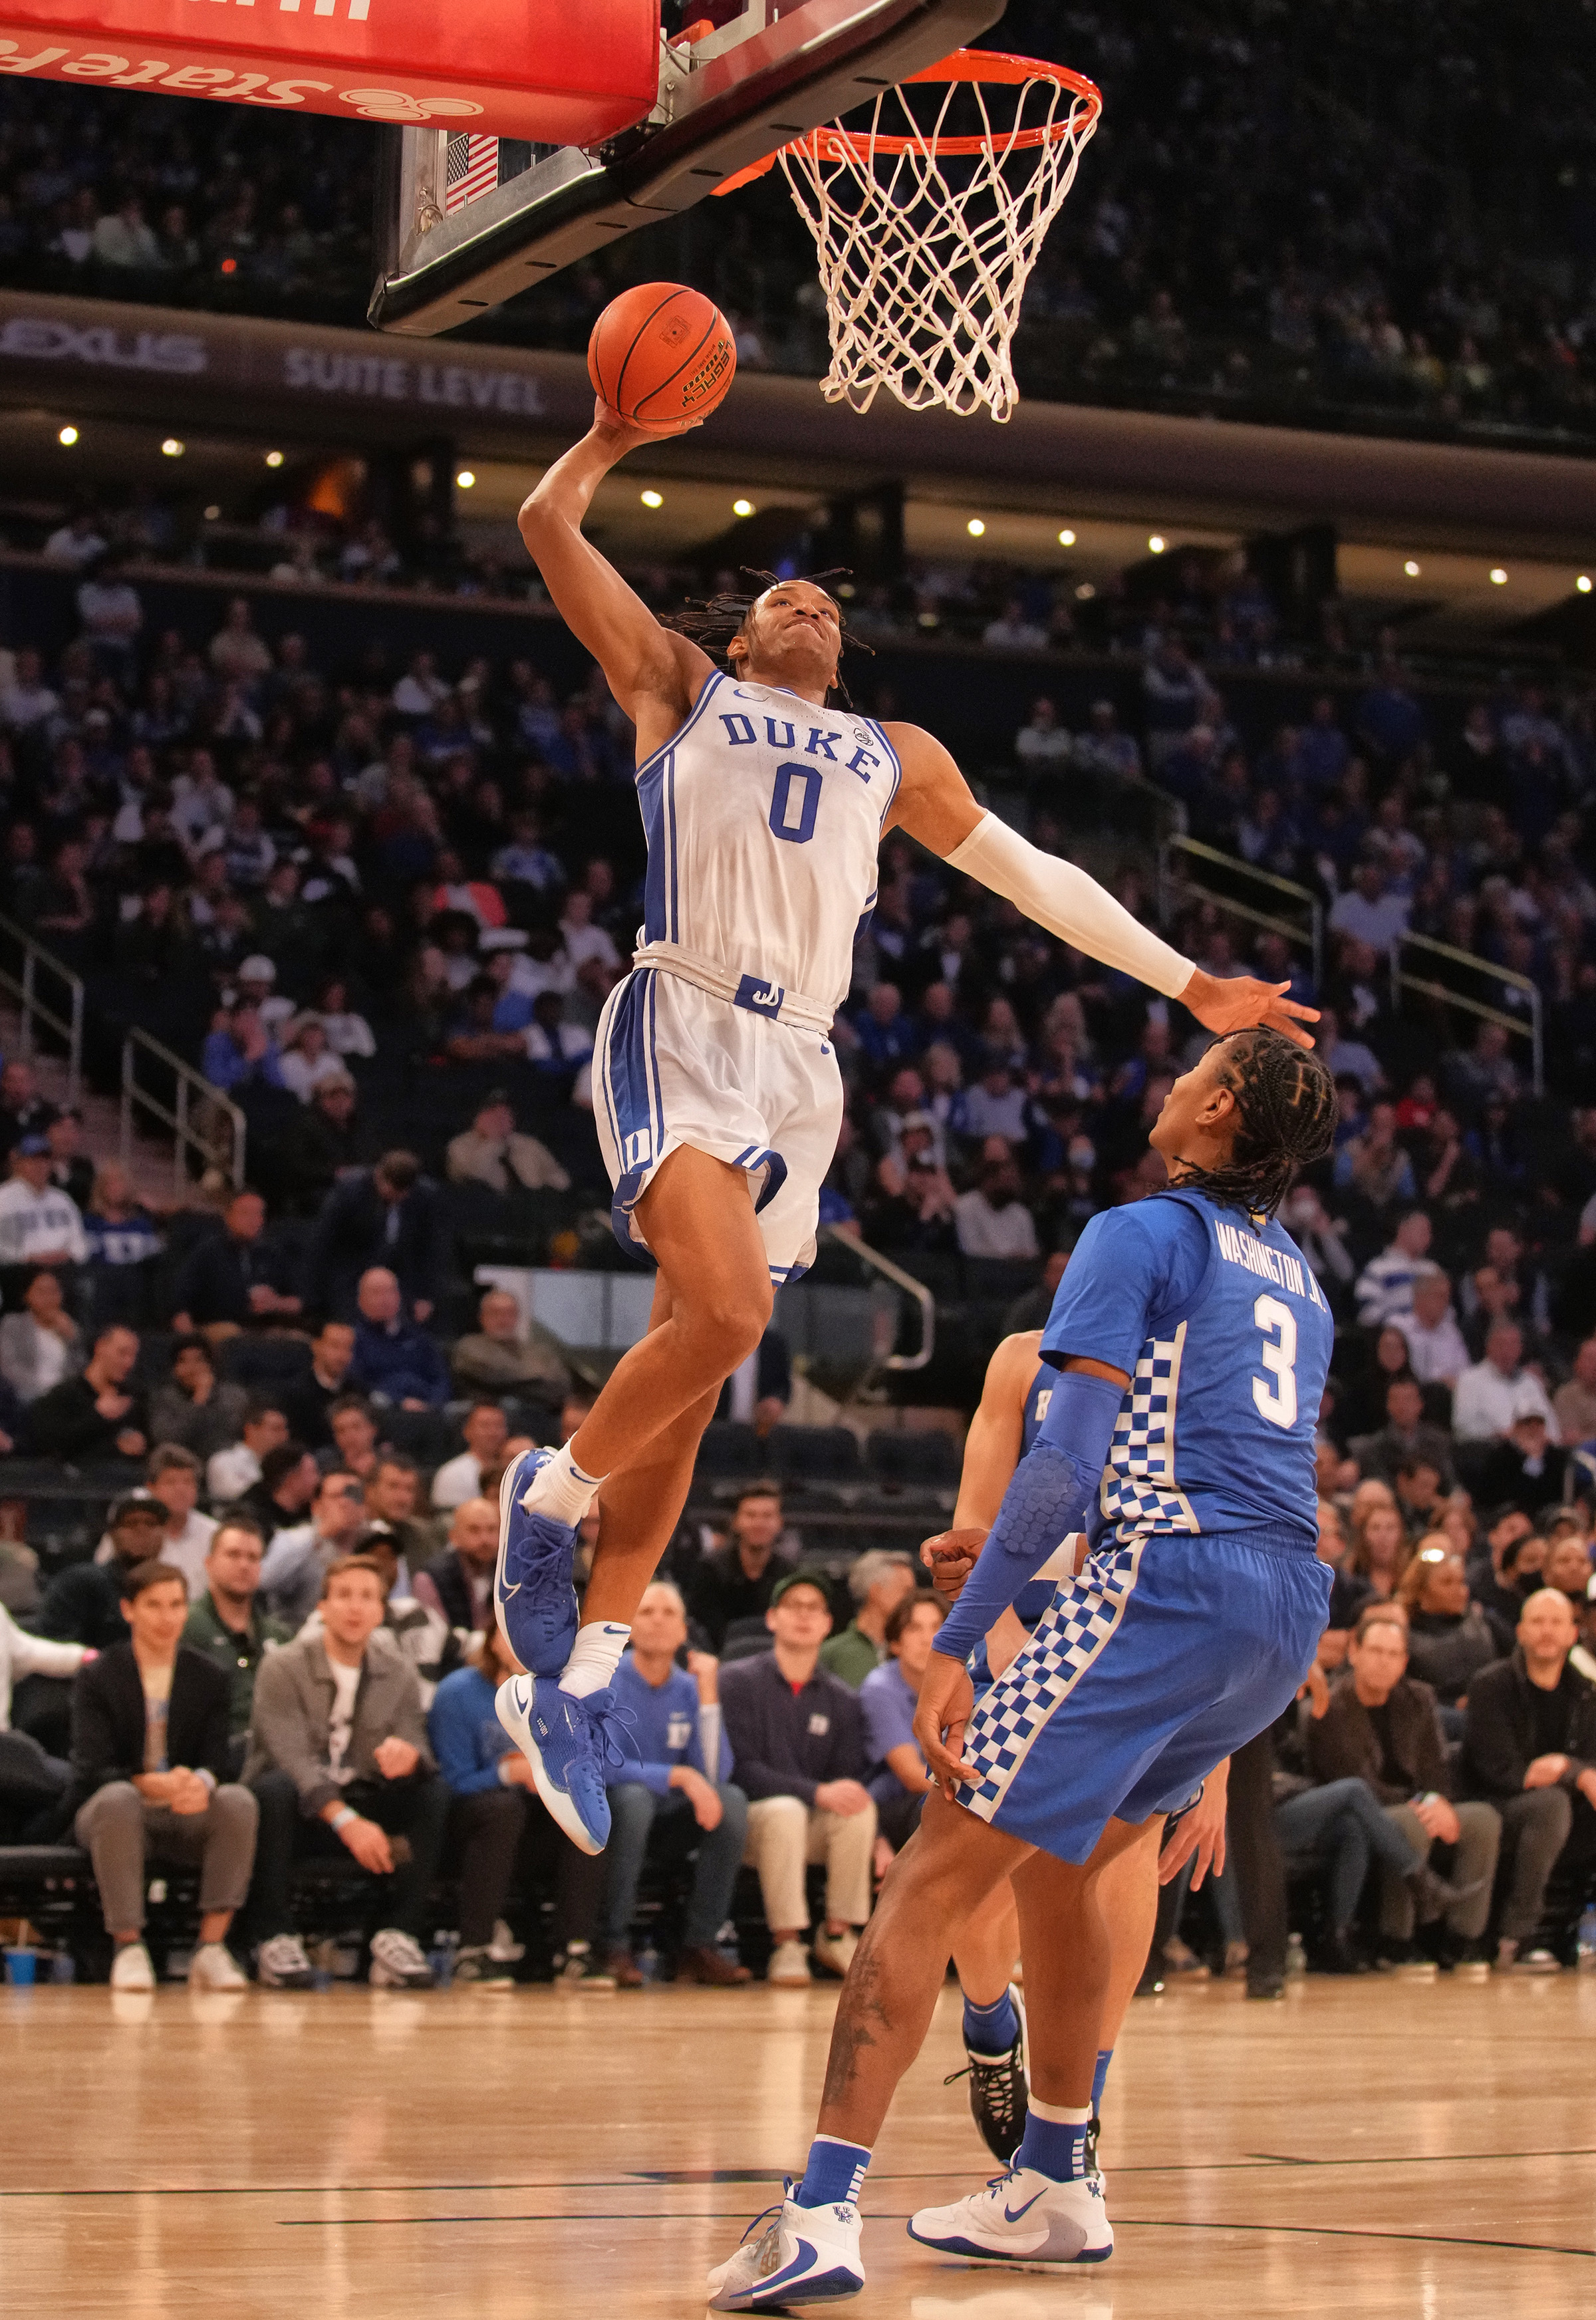 Duke's Wendell Moore dunks against the Kentucky Wildcats at the Champions Classic